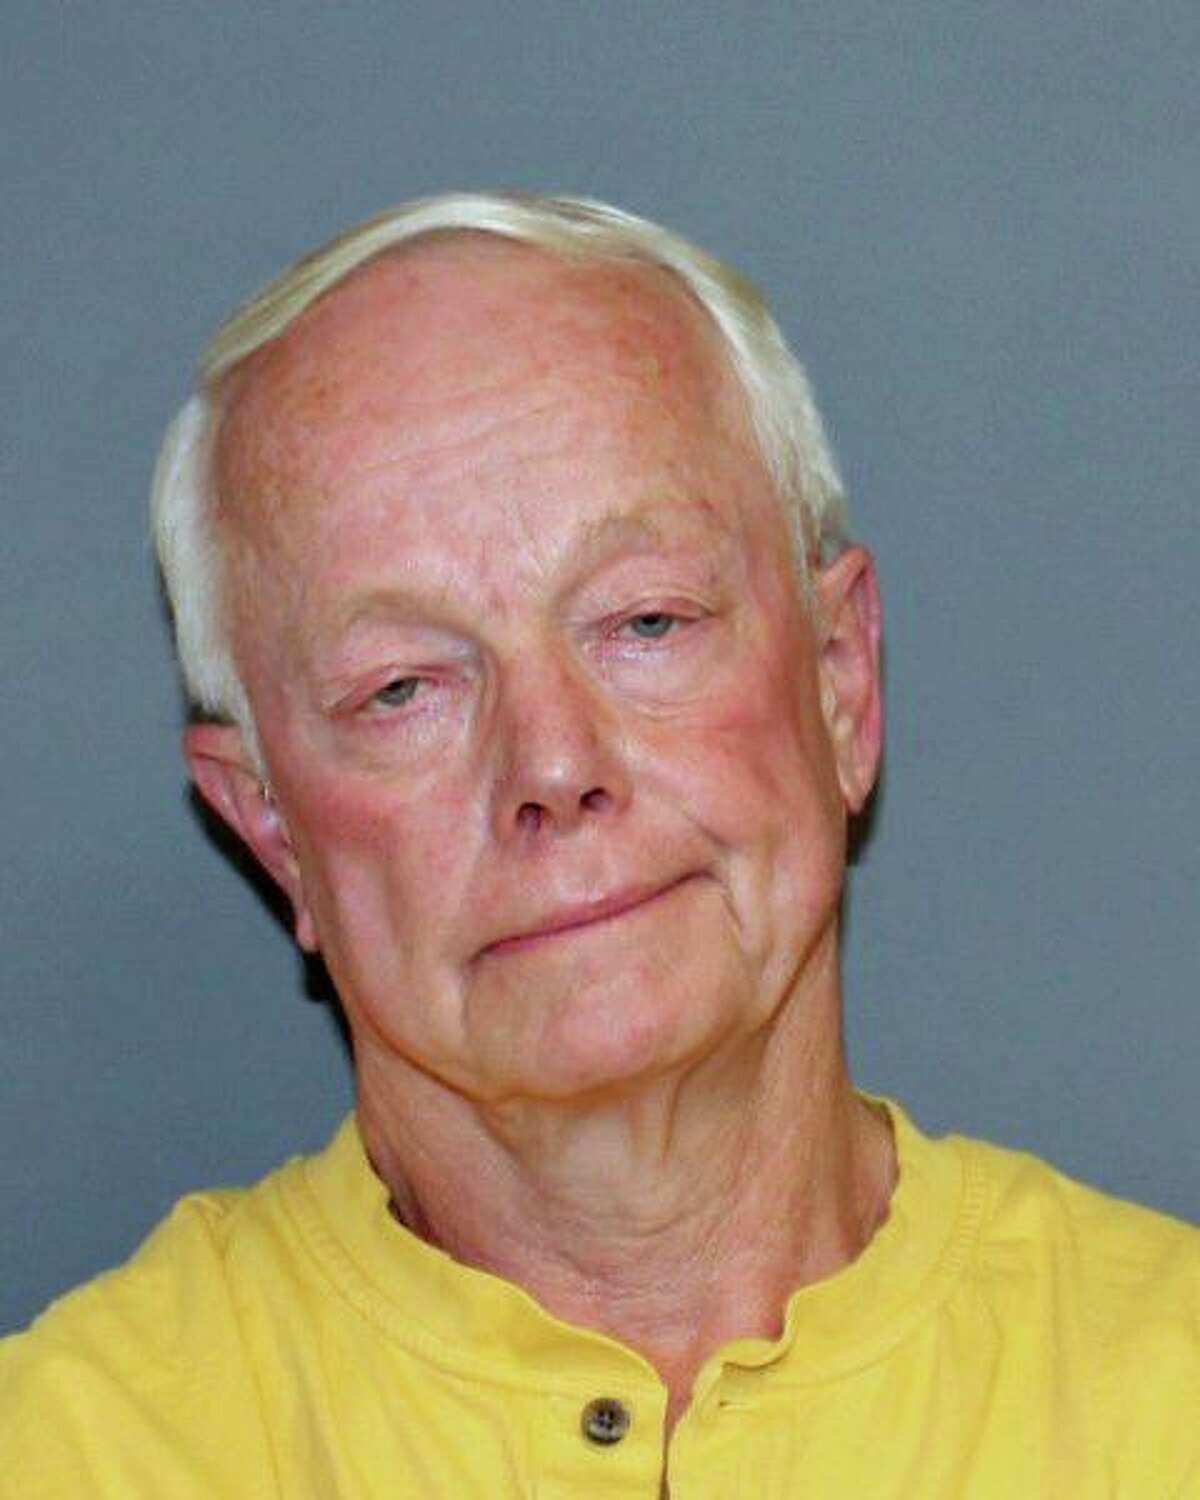 Donald Hutchinson, 74, of Shelton, was charged with disorderly conduct and three counts of risk of injury to a minor after an alleged disturbance on a Shelton school bus on Sept. 18, 2019.